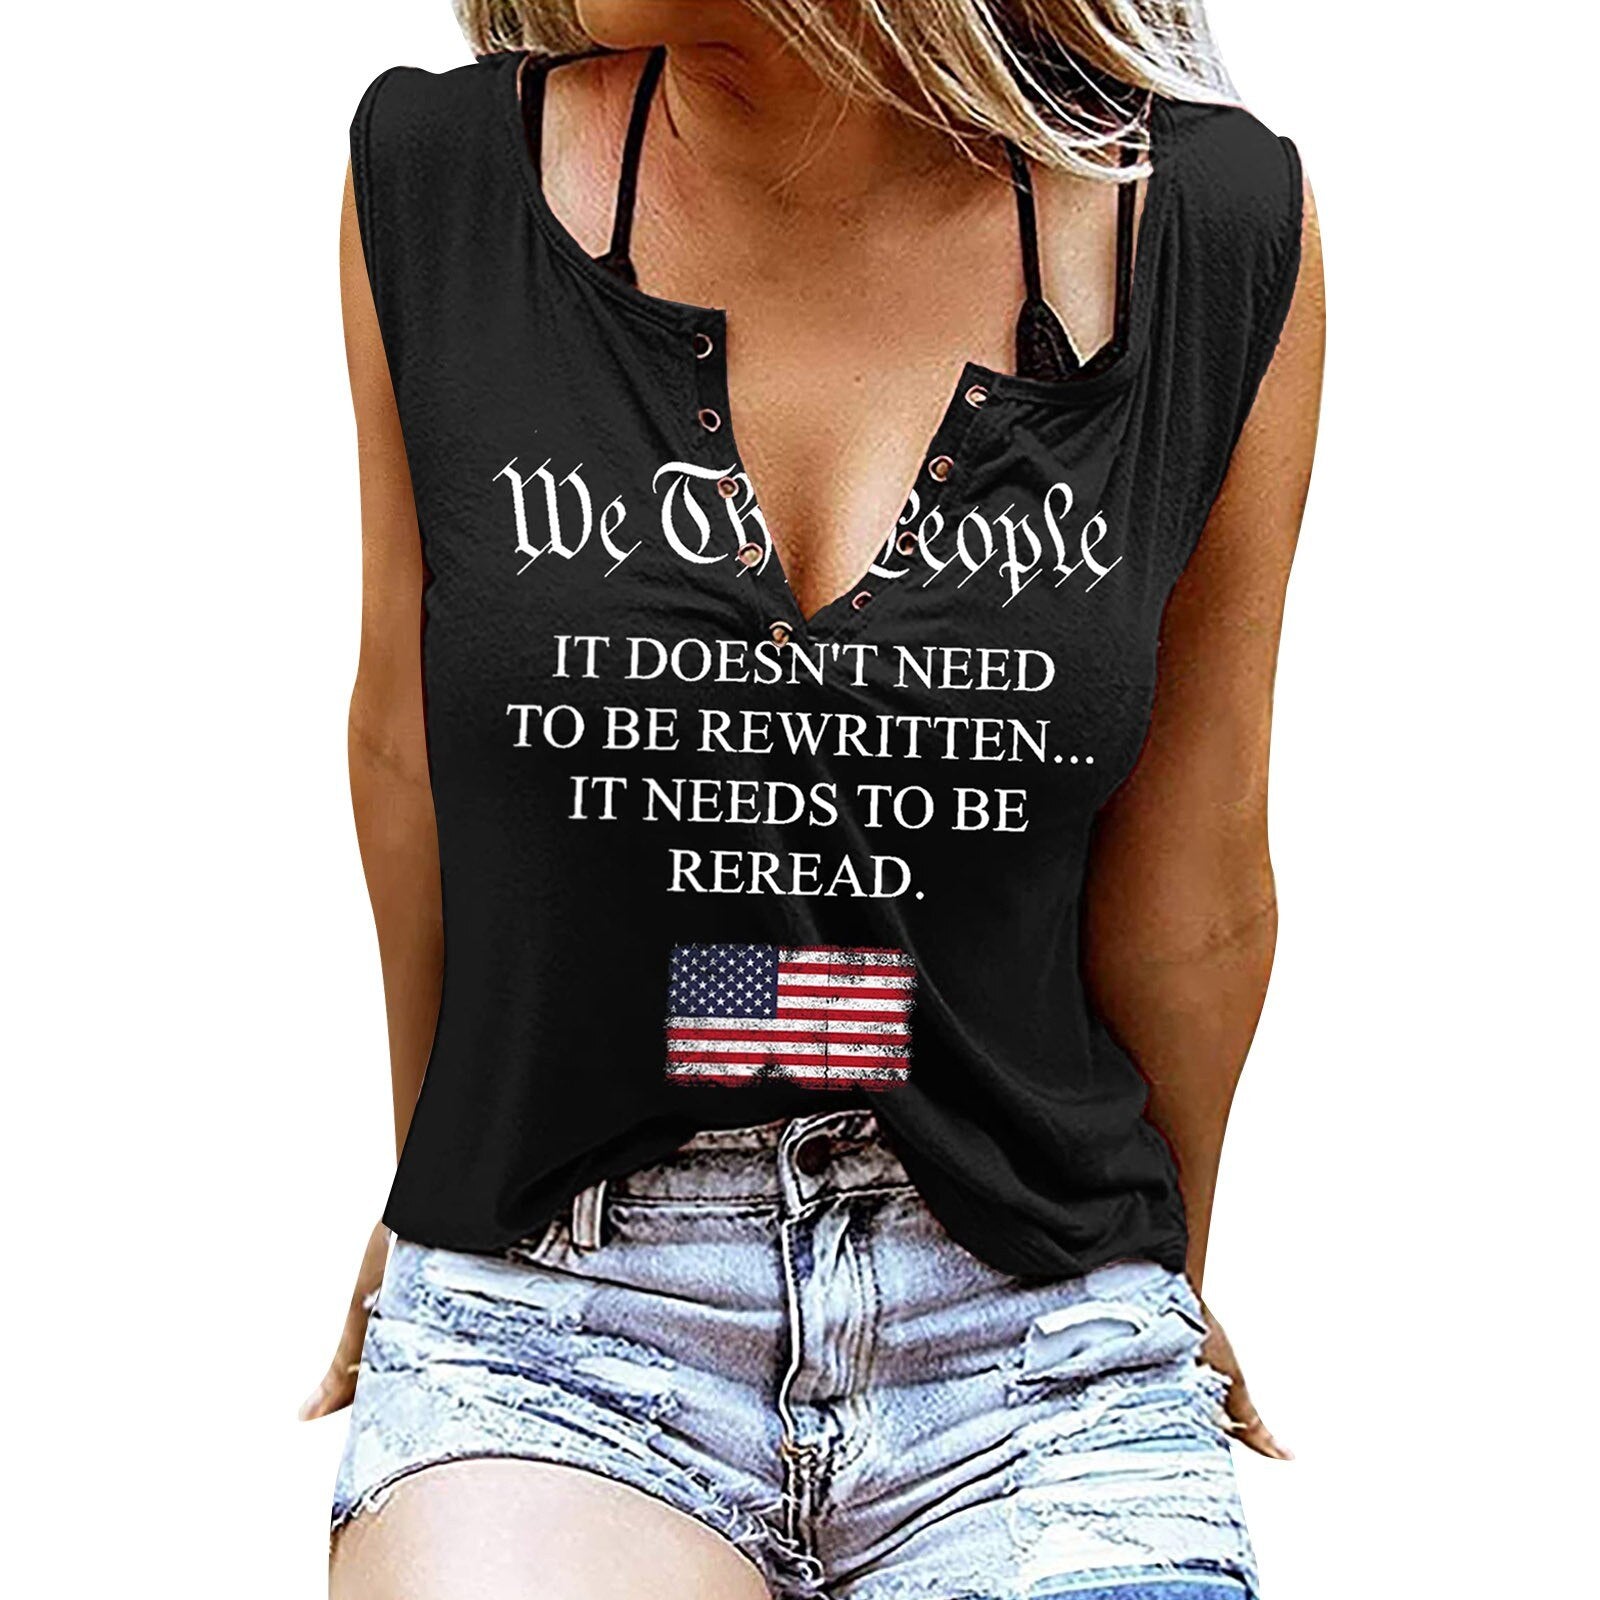 American Flag Tank Tops For Women 4th Of July Shirts Ring Hole Sleeveless V Neck T Shirt Top Patriotic Tees Vetements Femme Ete